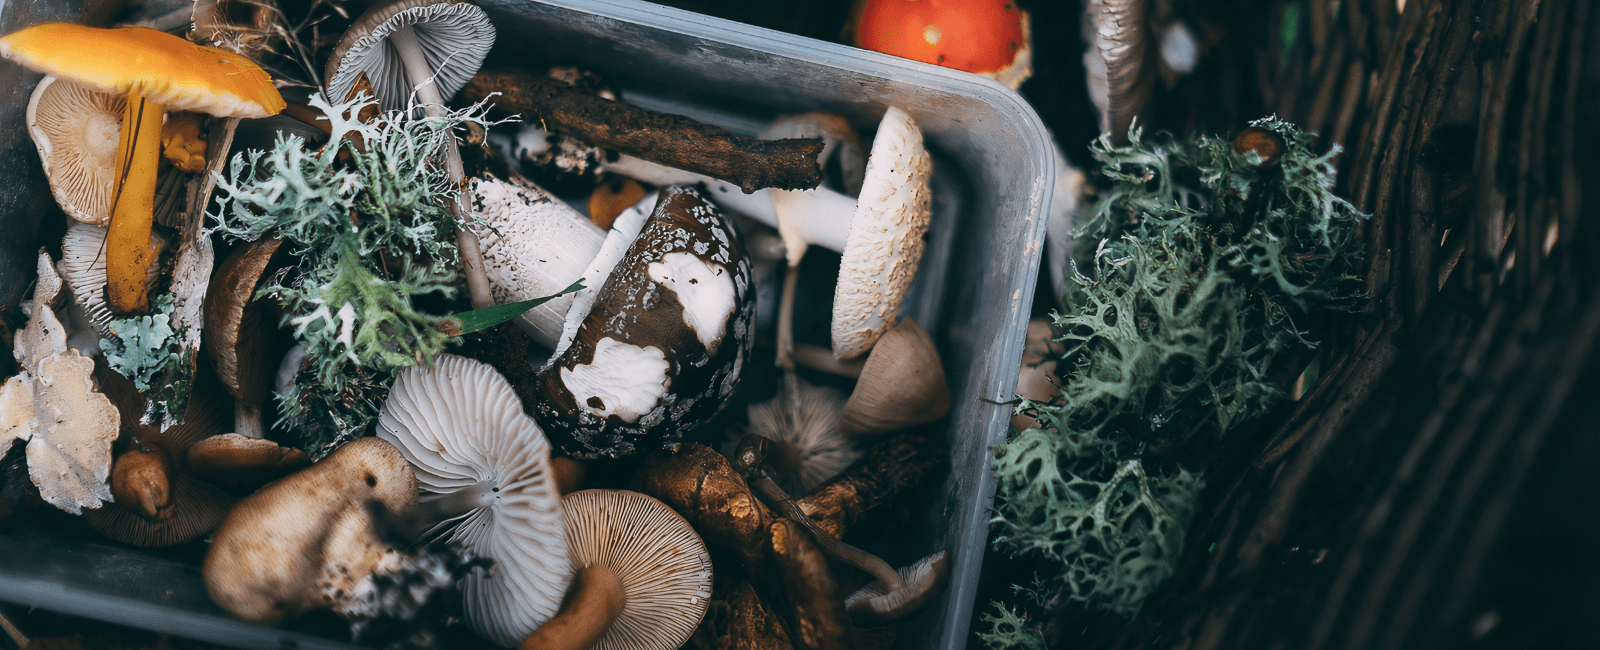 The Mushroom Forums That Cultivate Community